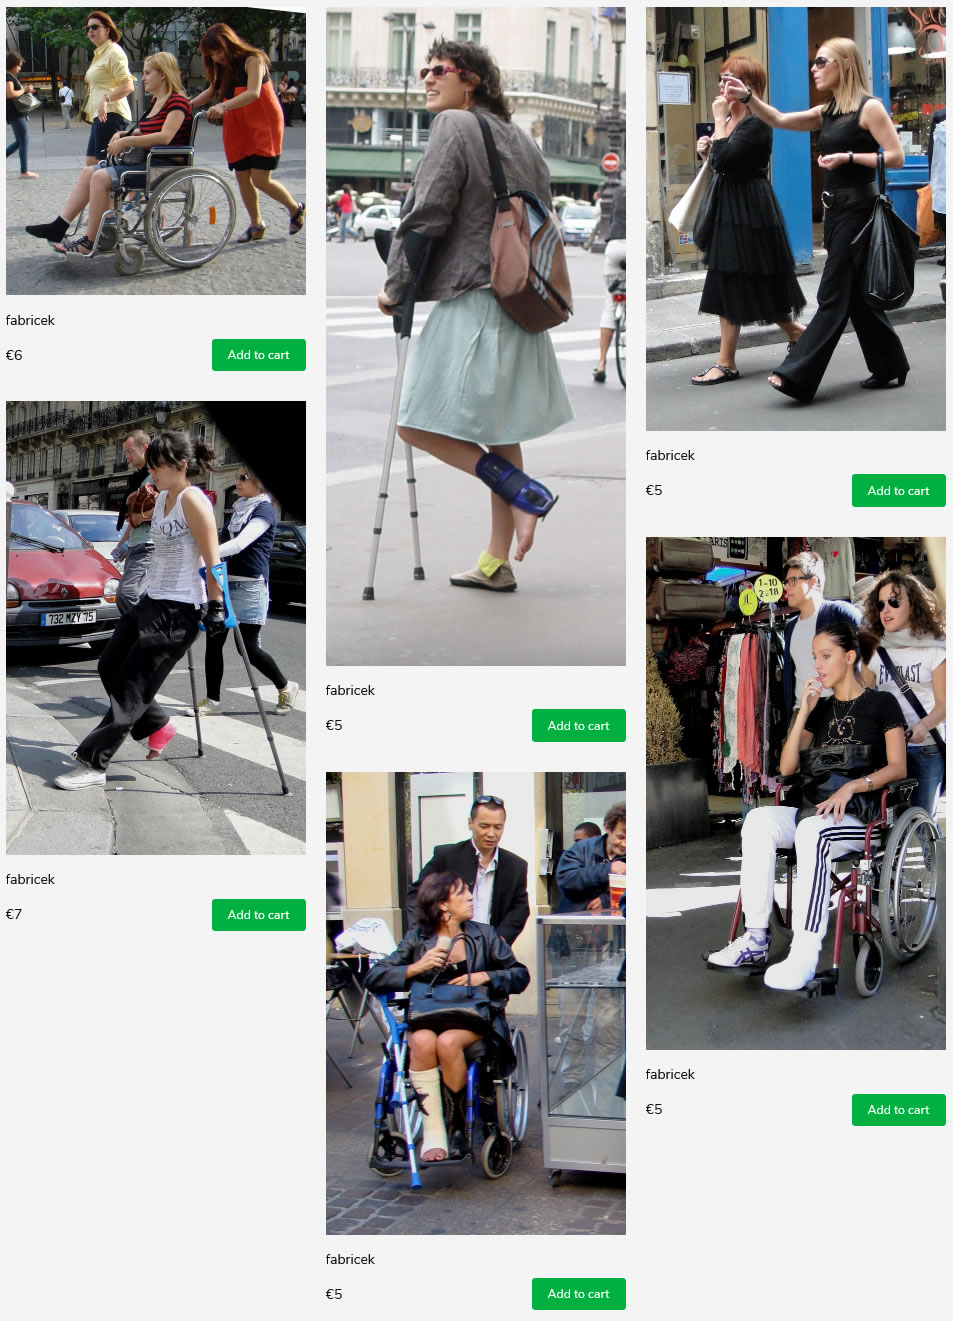 6 sets of french women with injured feet on crutches and in wheelchairs. Wearing casts and braces.